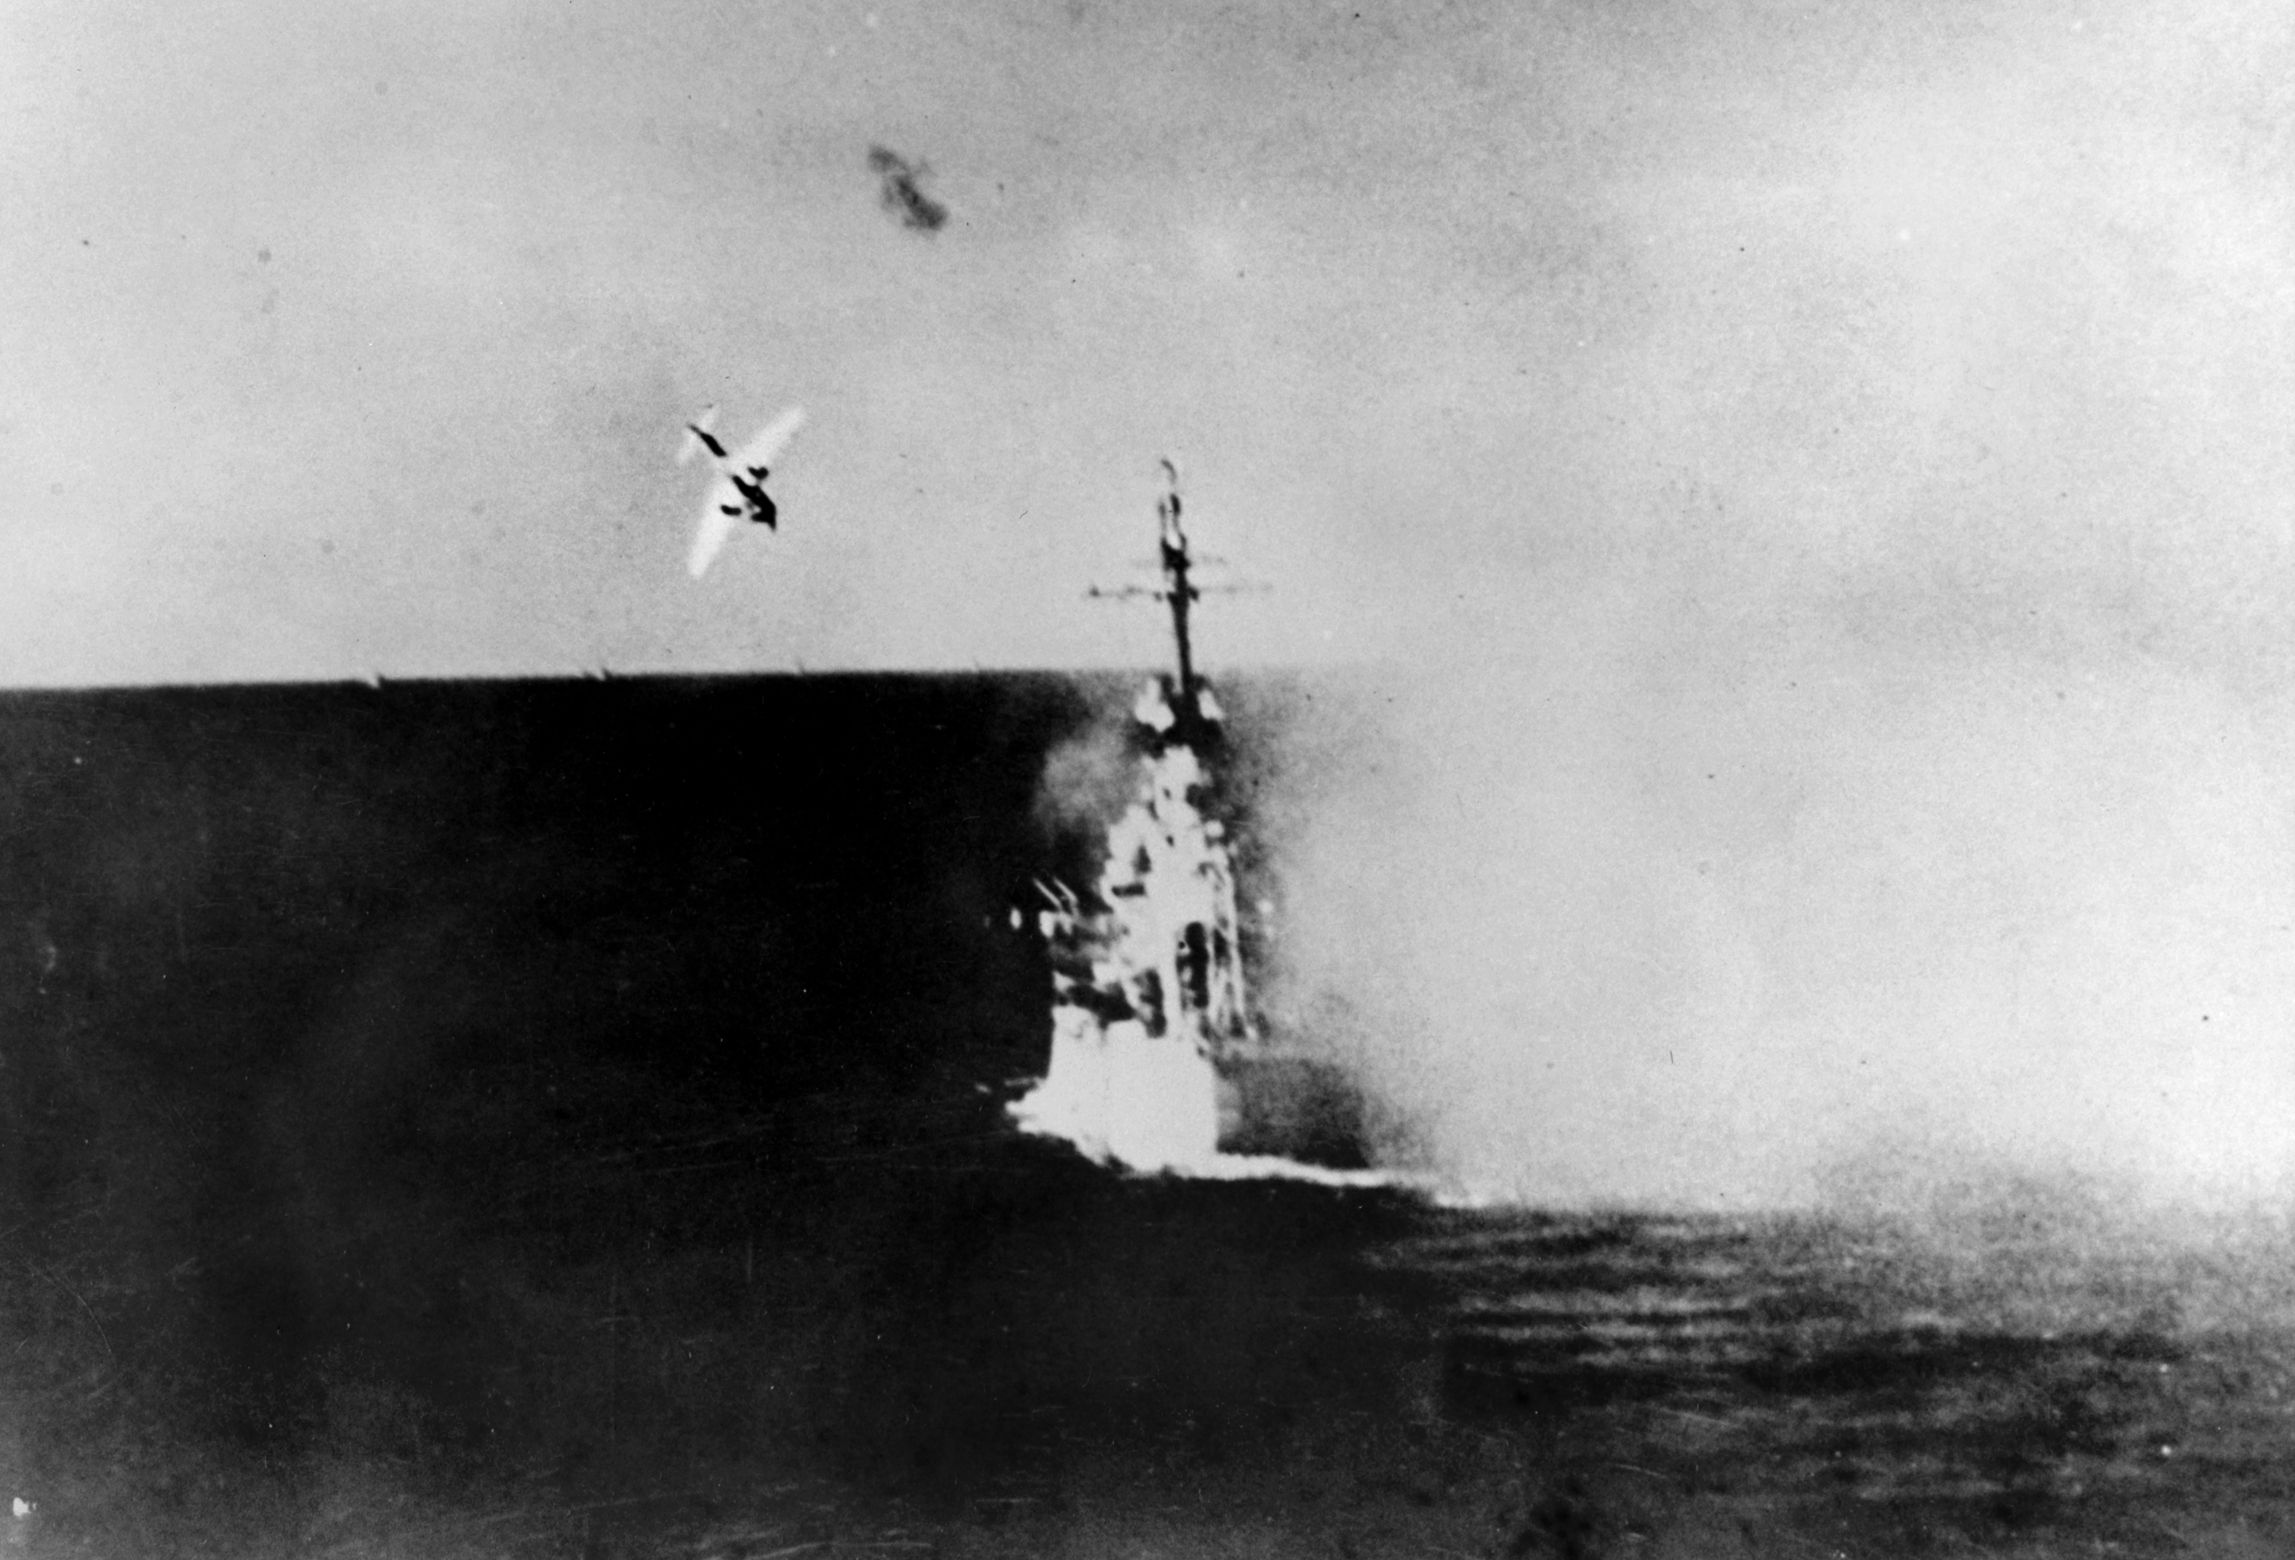 A Japanese kamikaze suicide plane dives on the light cruiser USS Columbia on January 6,  1945. The enemy plane crashed into the cruiser near the aft guns causing extensive damage and killing a number of crewmen during this action in Lingayen Gulf.